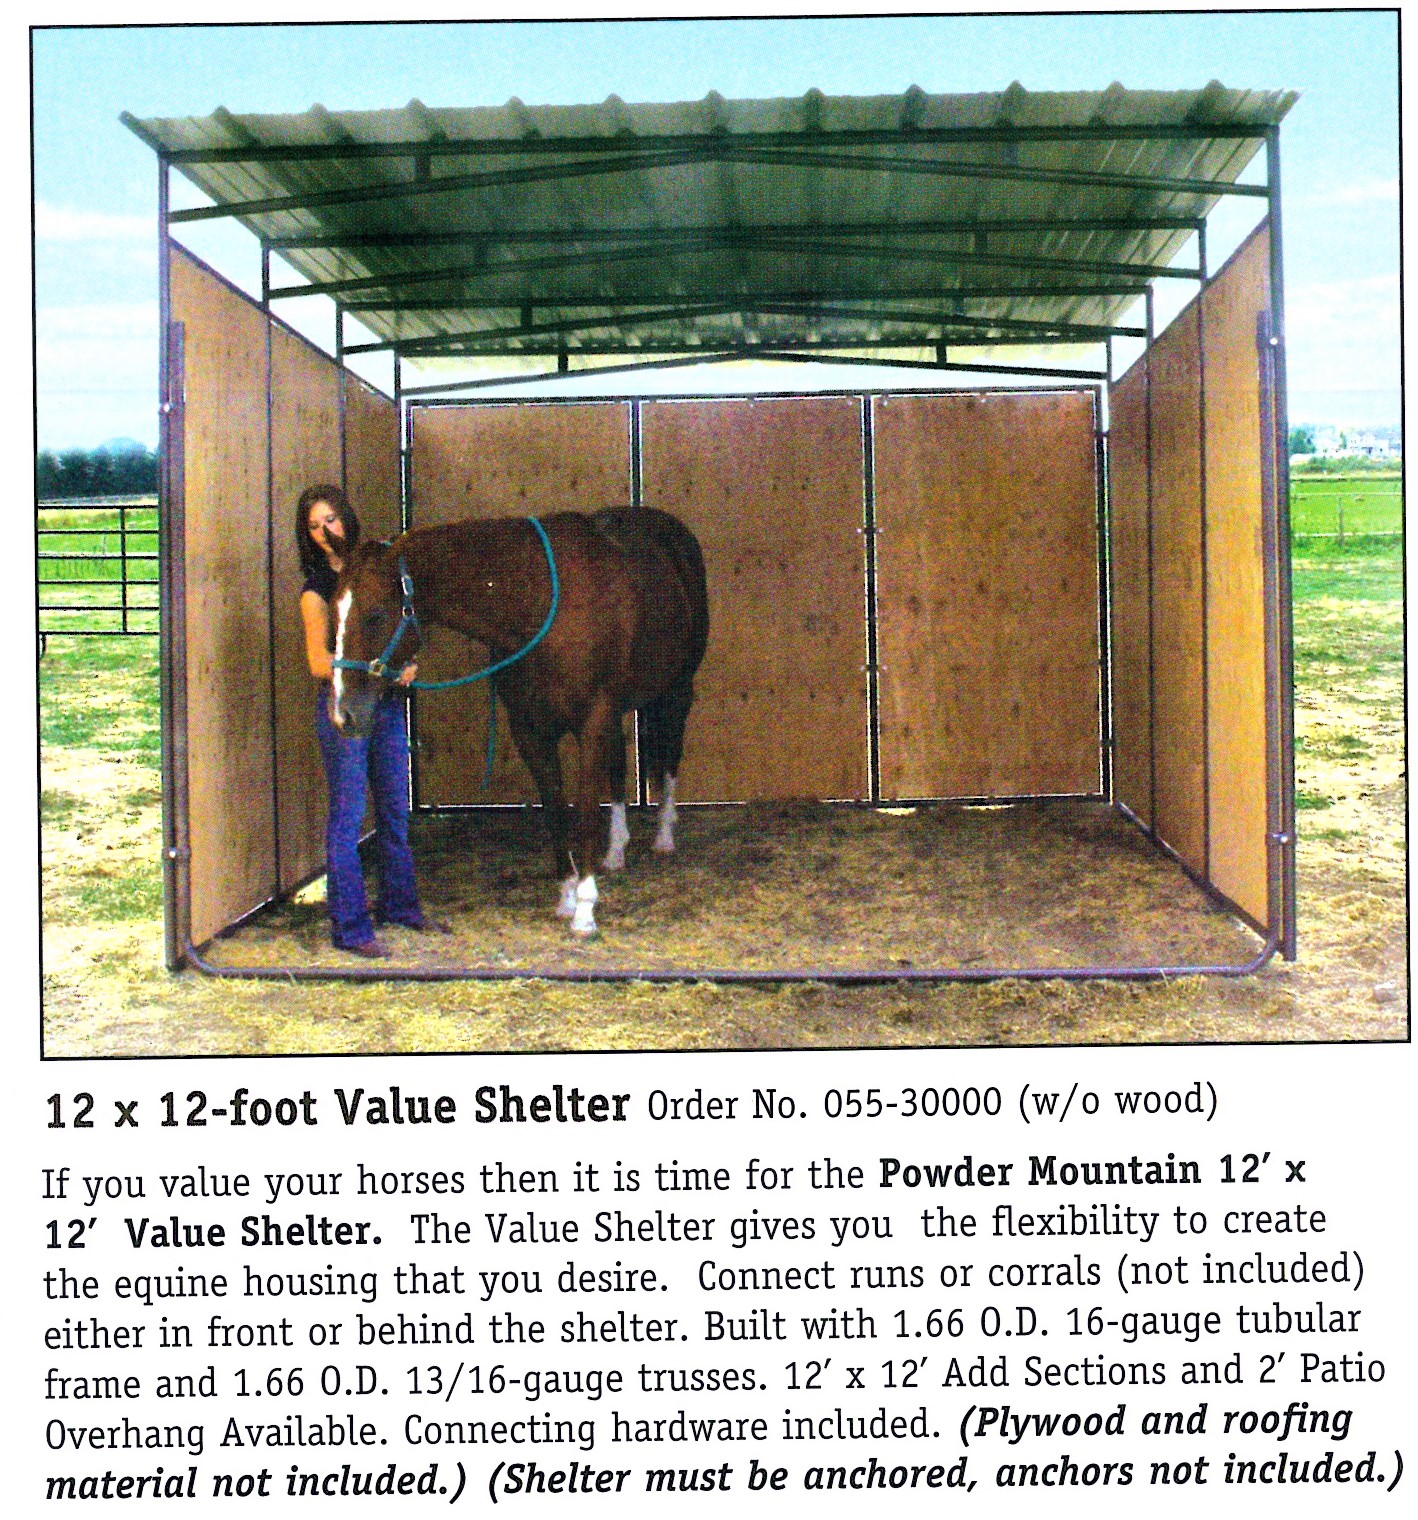 powder-mountain-12-x-12-equine-shelter-details-without-wood-055-30000-pg-49.jpg